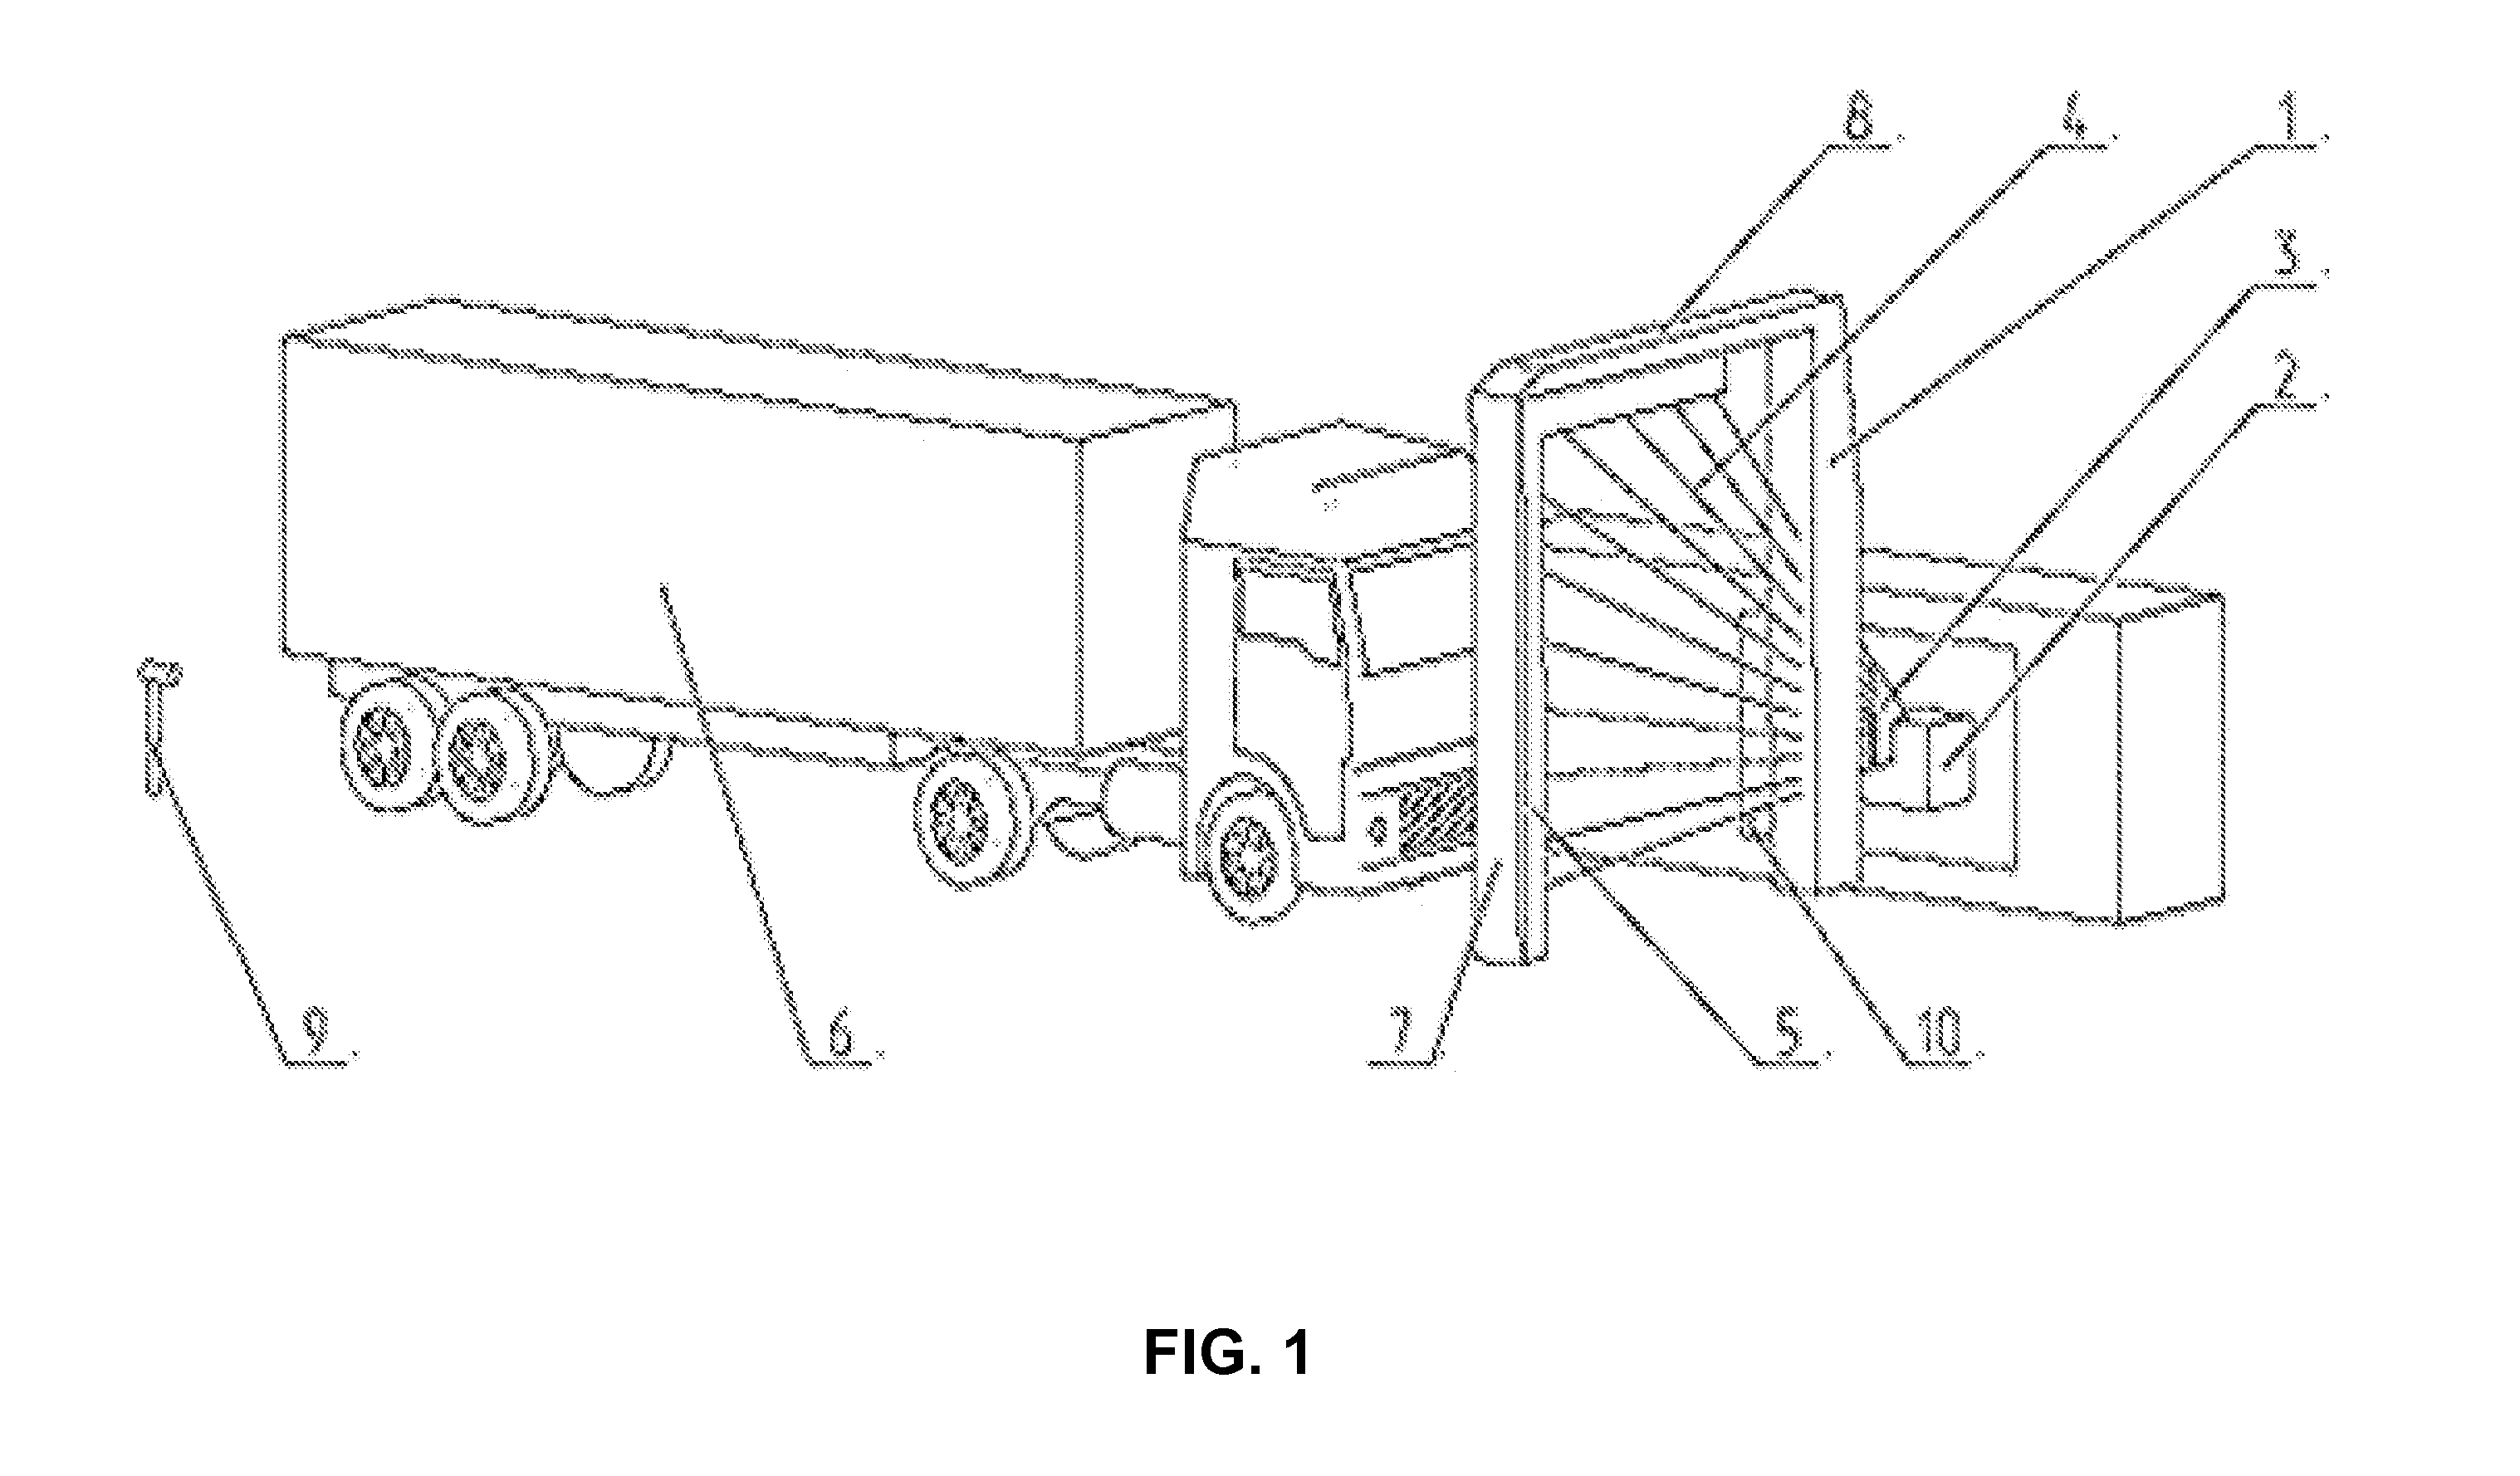 Cargo and vehicle inspection system